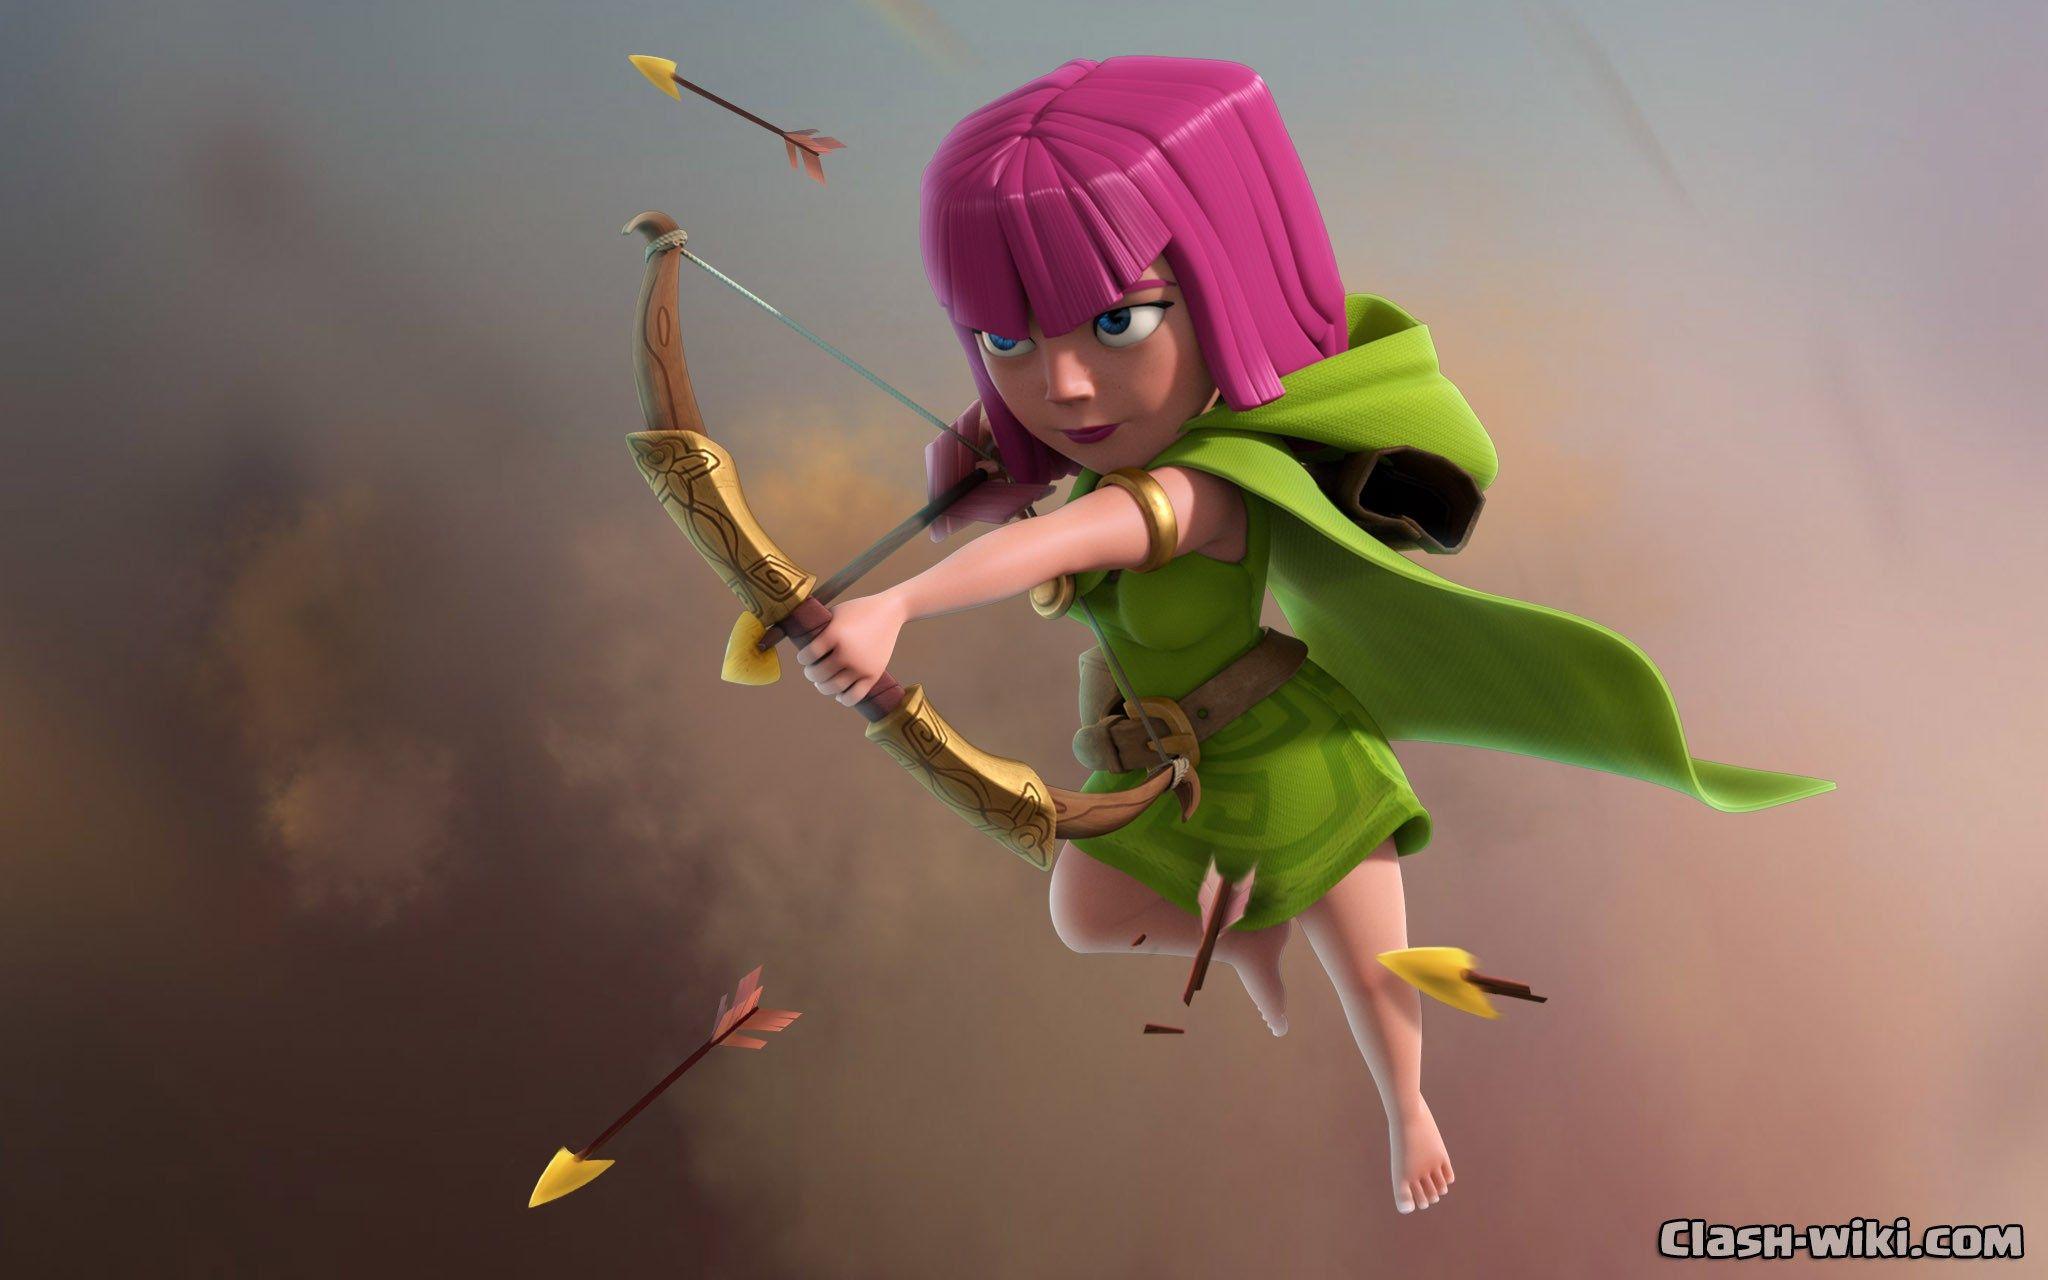 Coc Archer Queen Wallpapers Hd Many Hd Wallpapers Clash Of Clans.